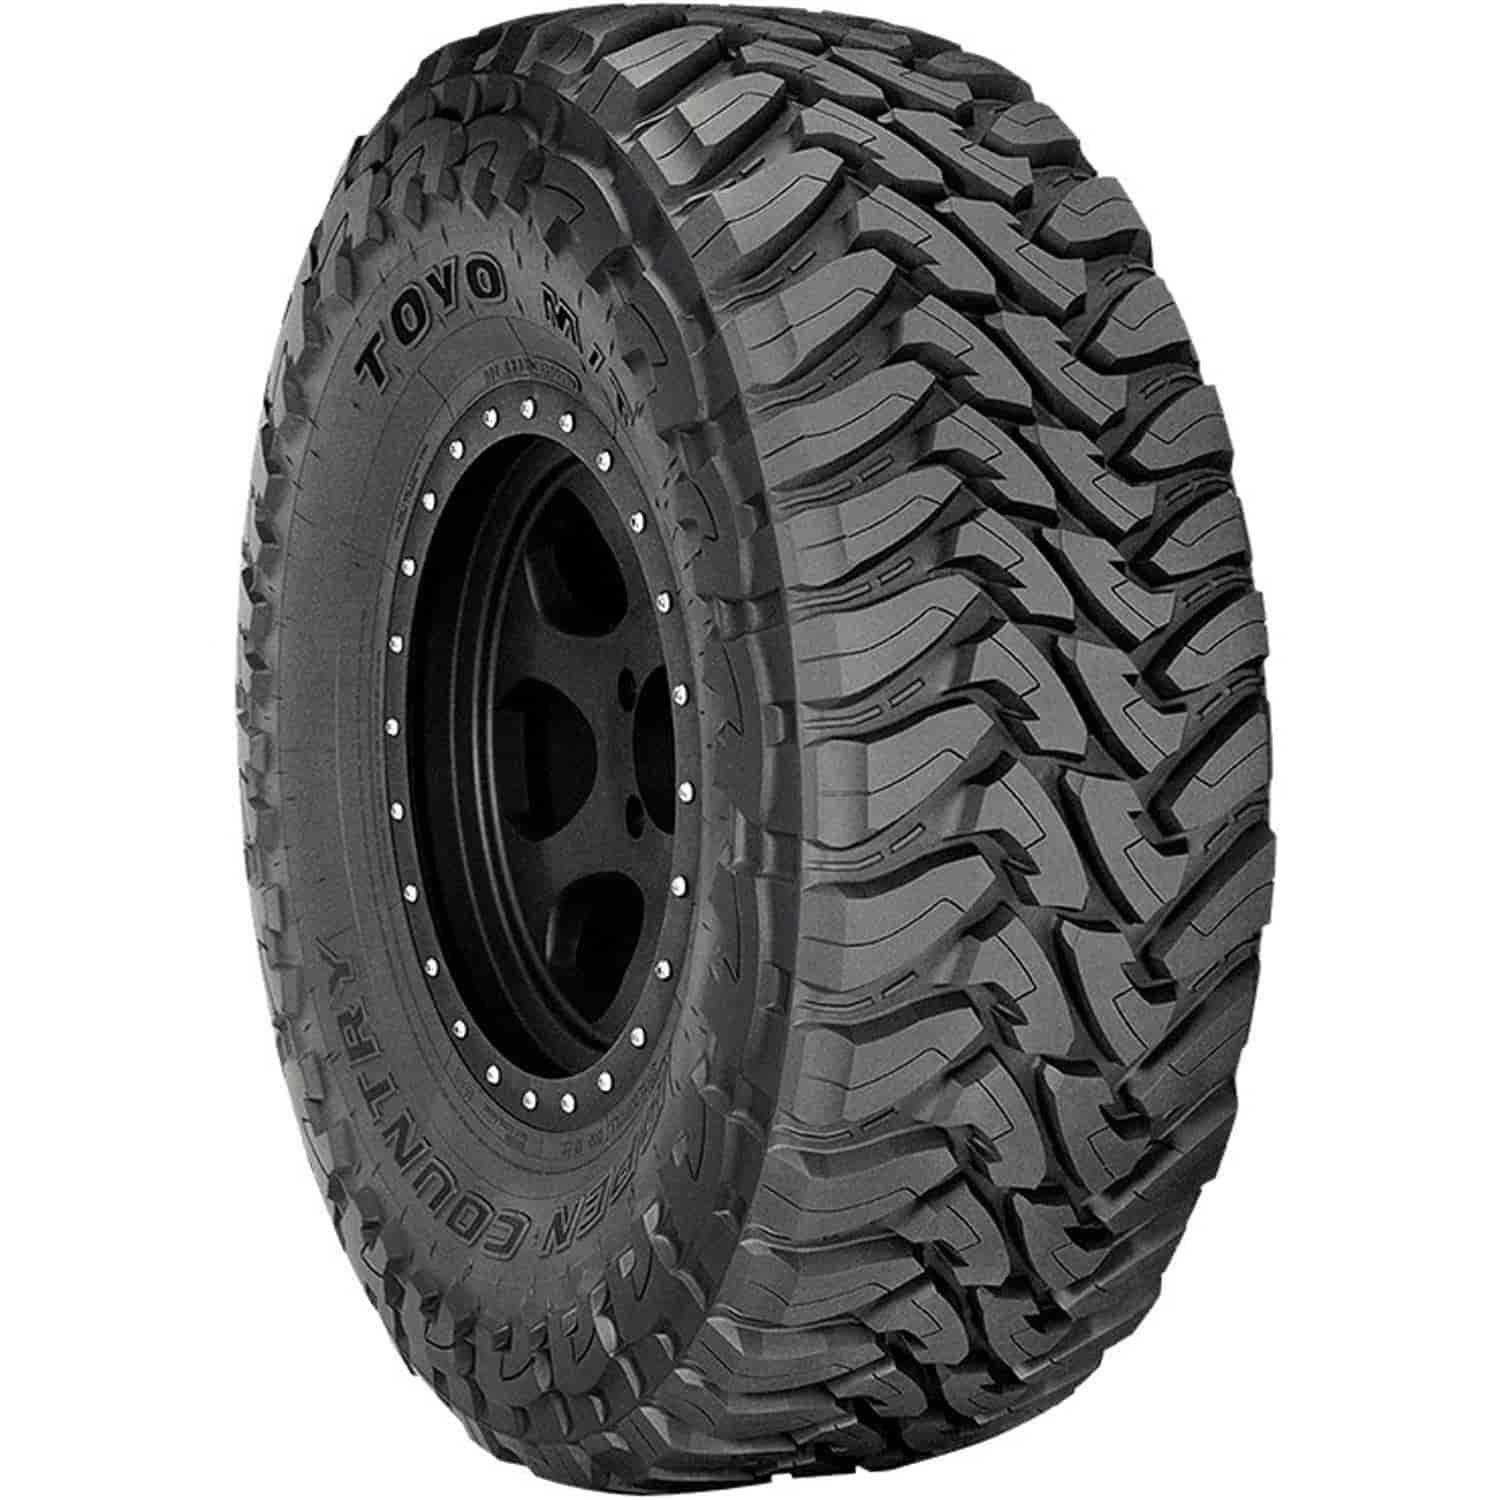 Open Country M/T LT315/75R16 127Q E/10 35X12.50R16